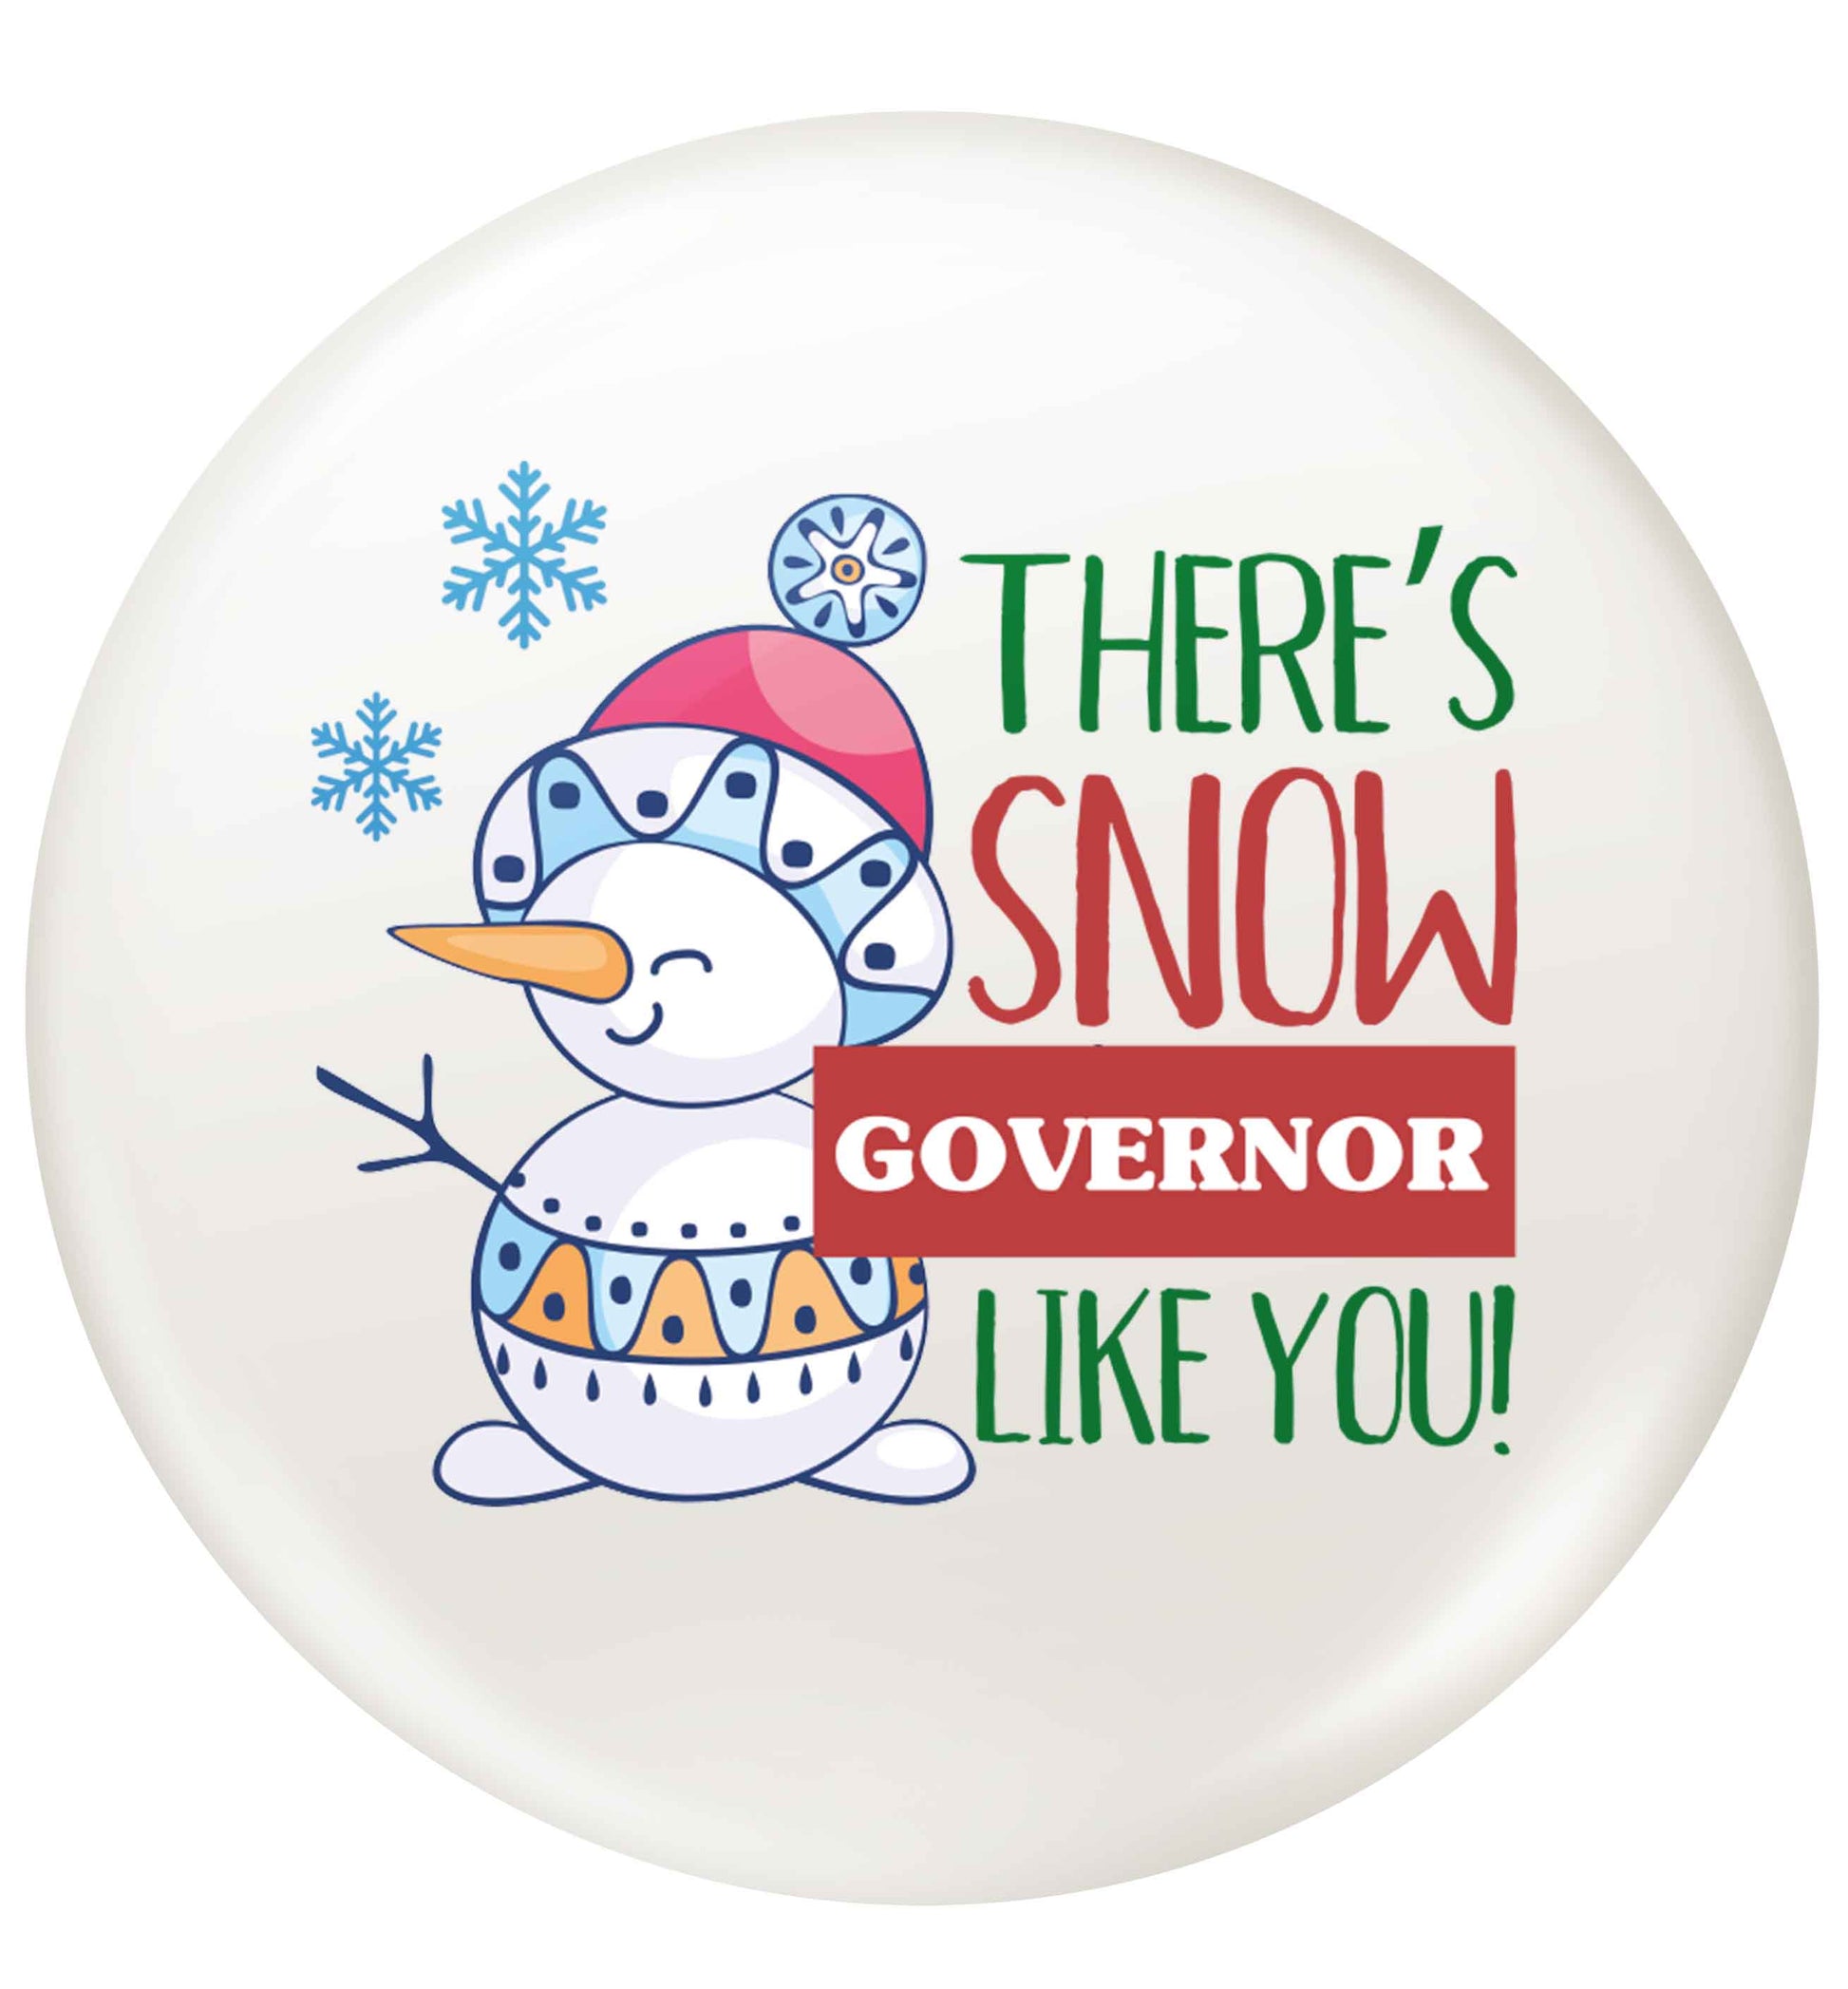 There's snow governor like you small 25mm Pin badge